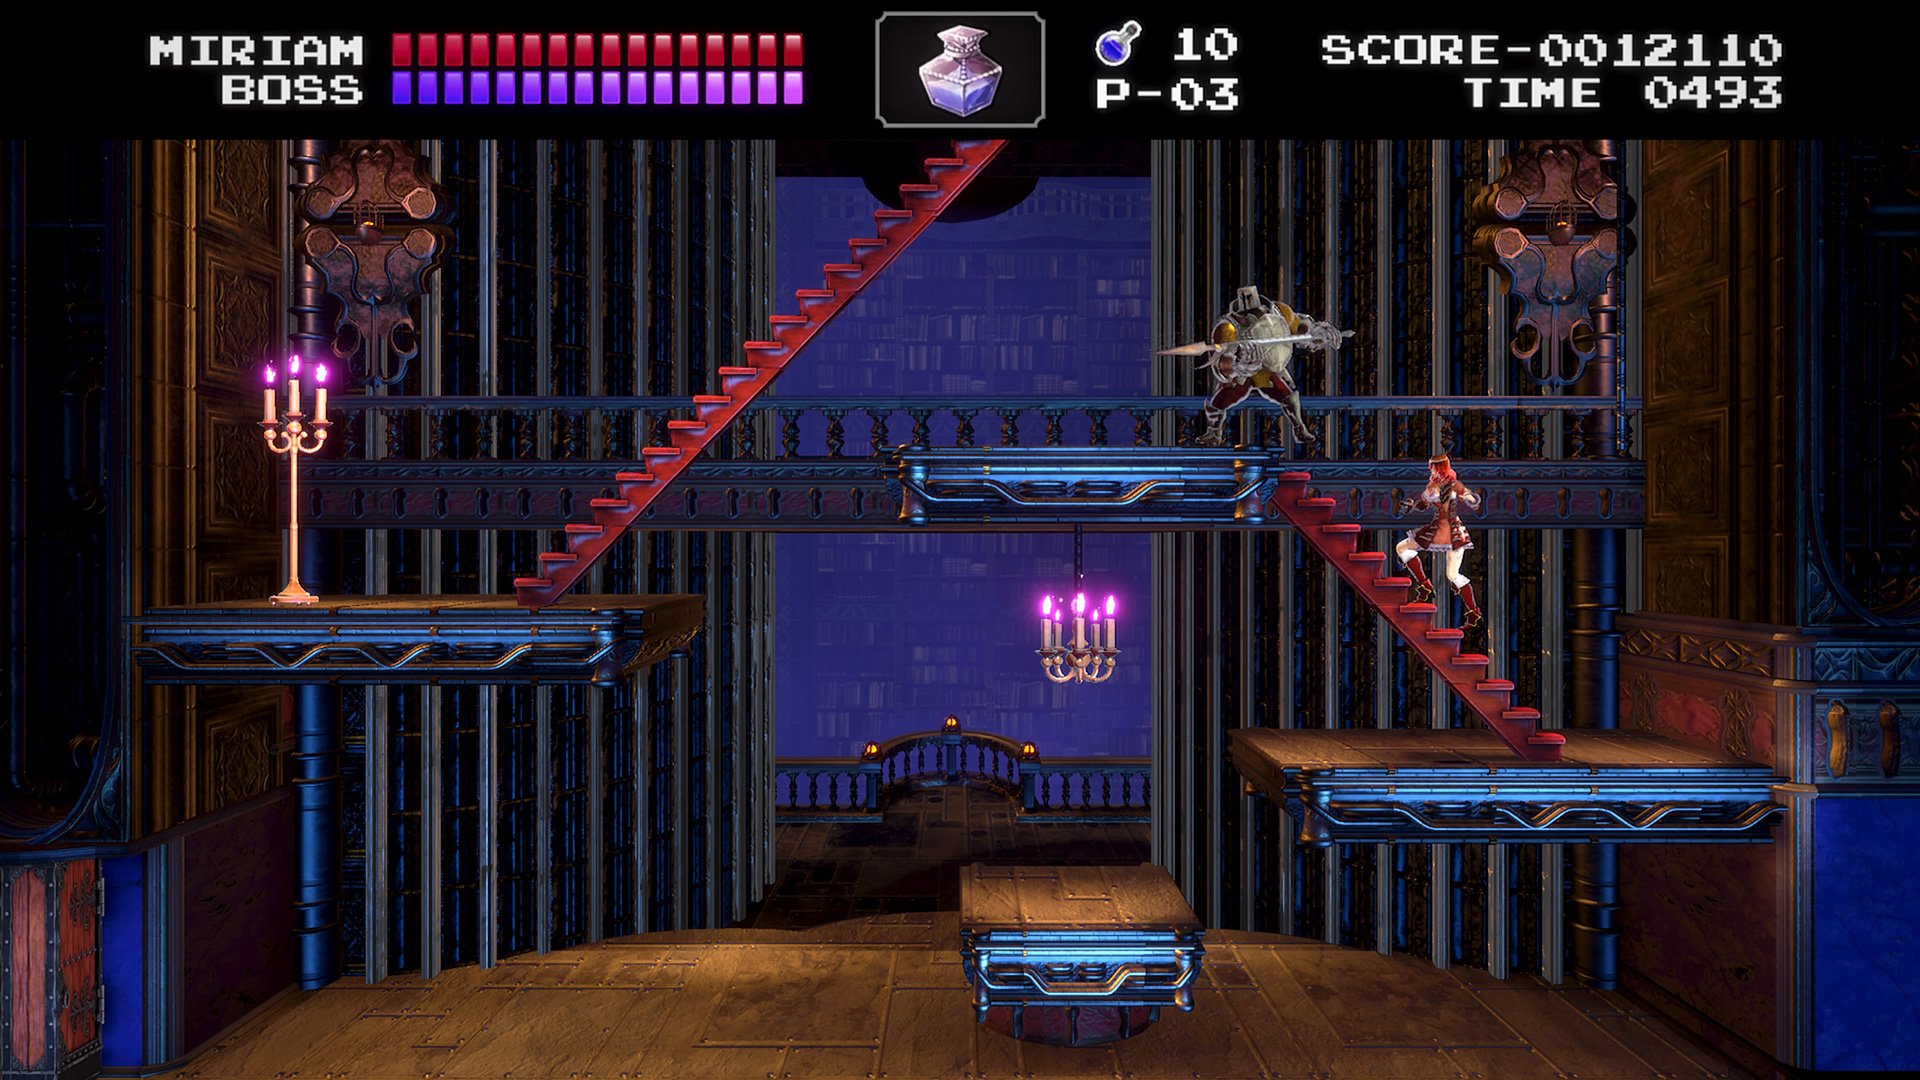 You must well bring together even more mileage out of Bloodstained with the 1986 variant of Classic Mode